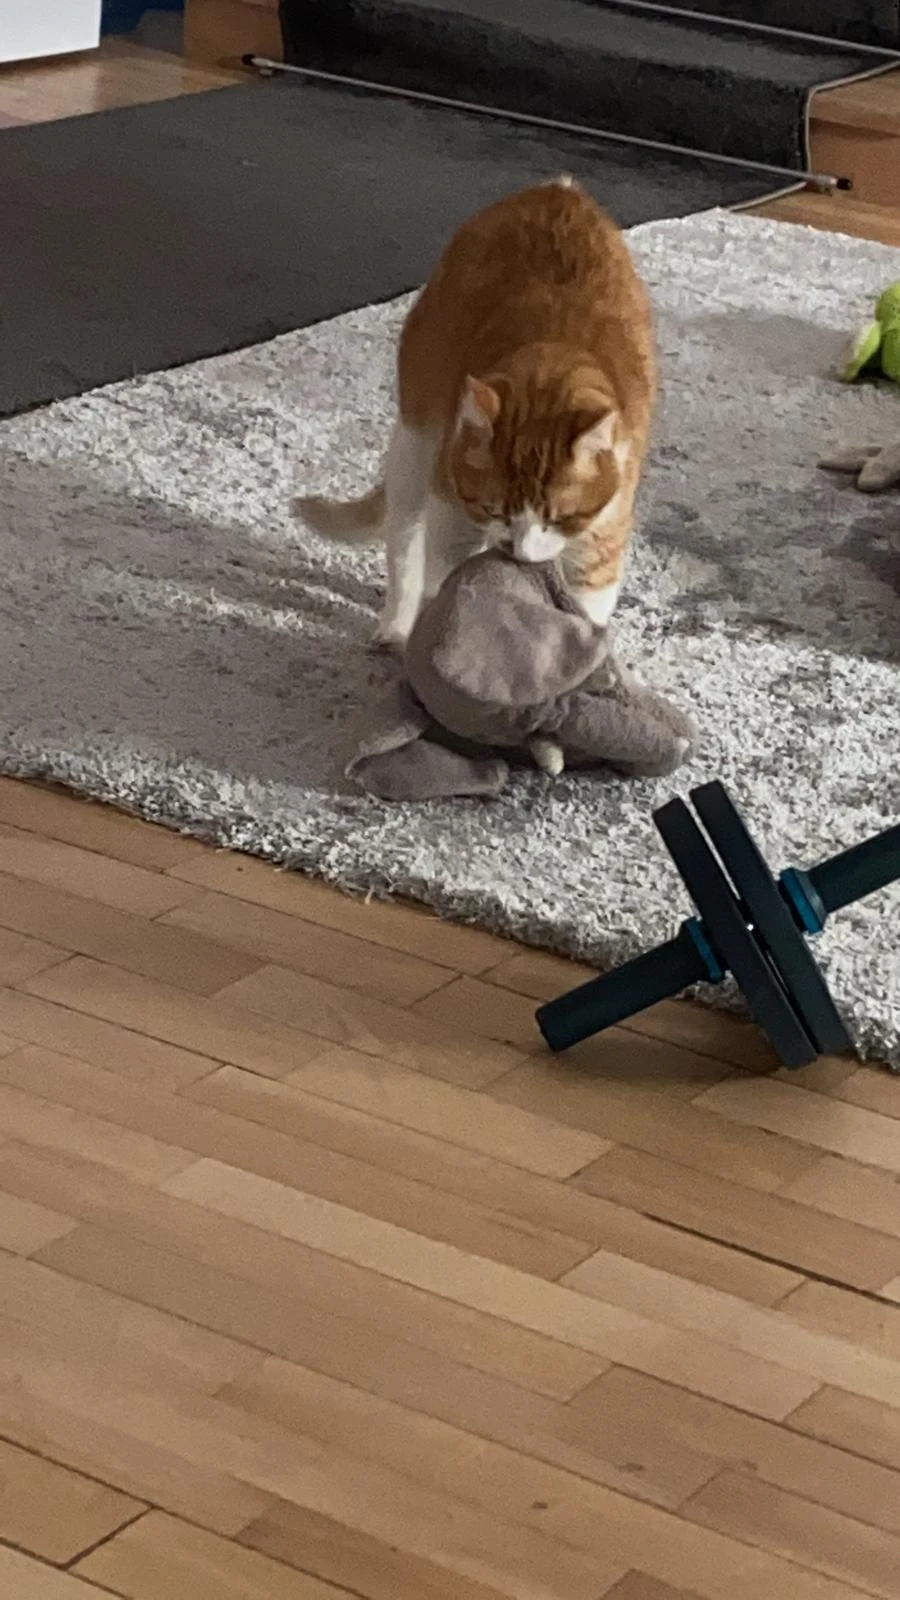 Question (no joke): each and every time I sneeze, my (sterilized) cat jumps from his place and starts frantically fucking his elephant. Is this a thing?